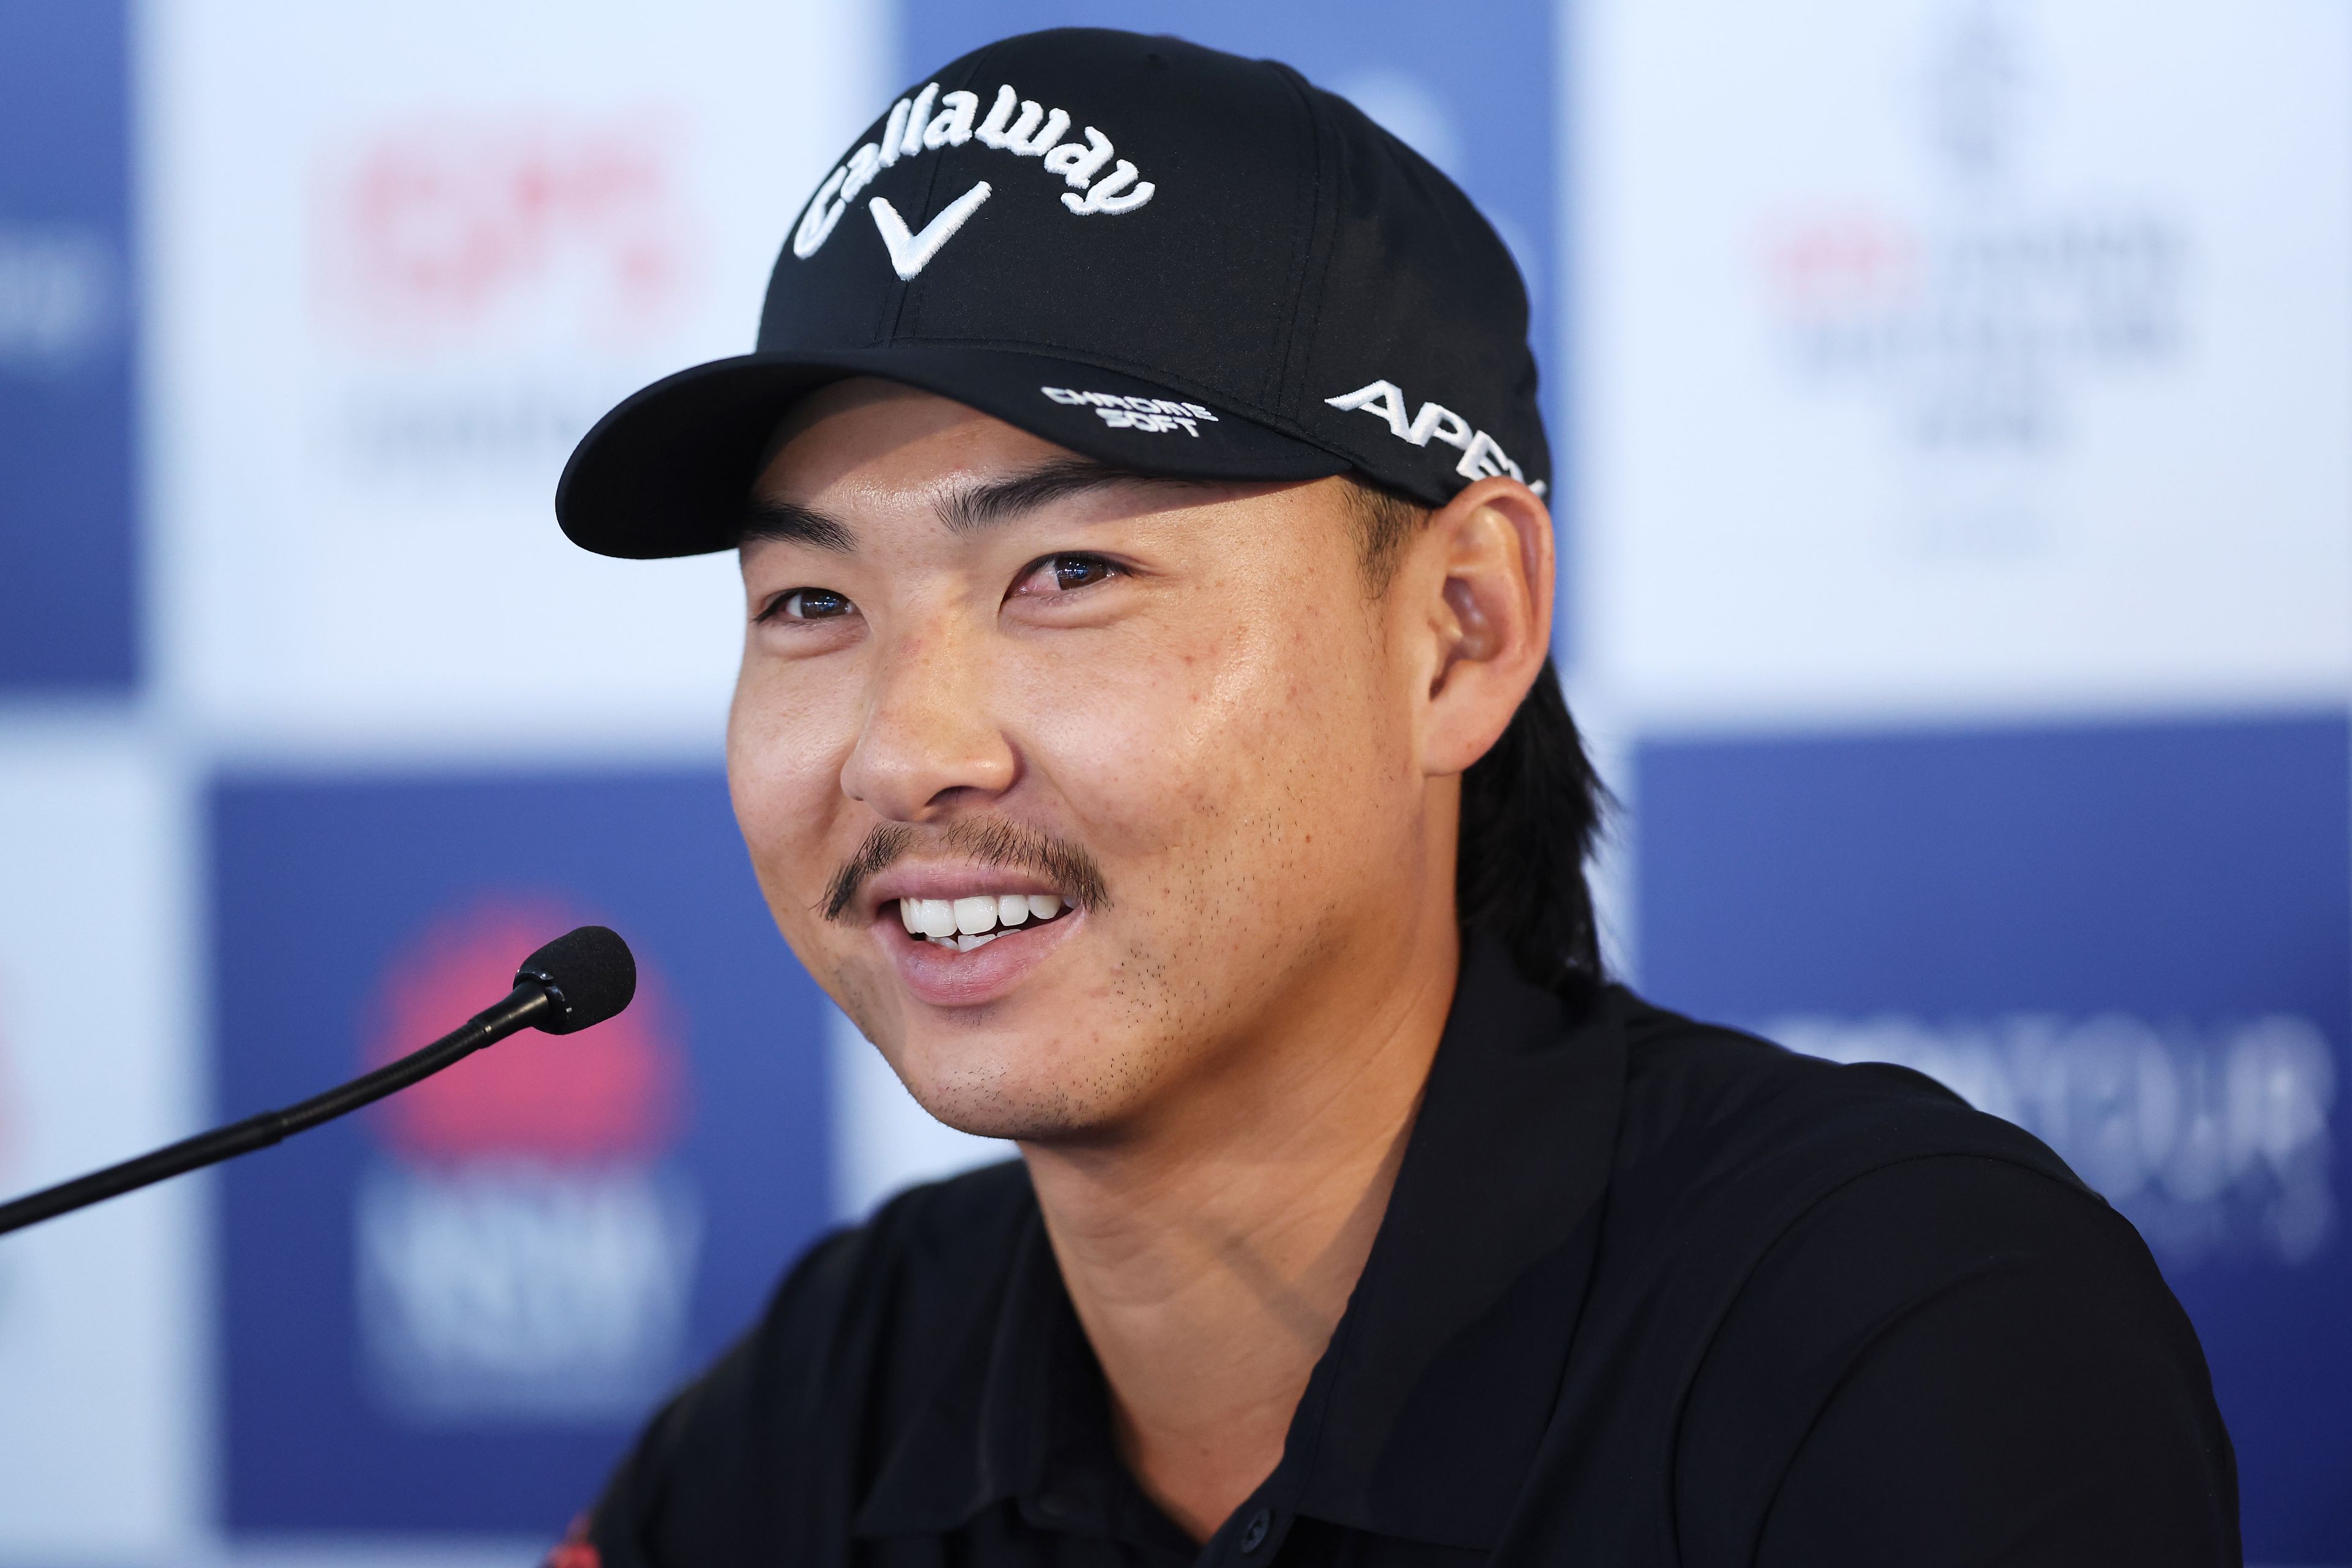 'I can': Min Woo Lee makes bold claim that he'll be Australia's own Tiger Woods